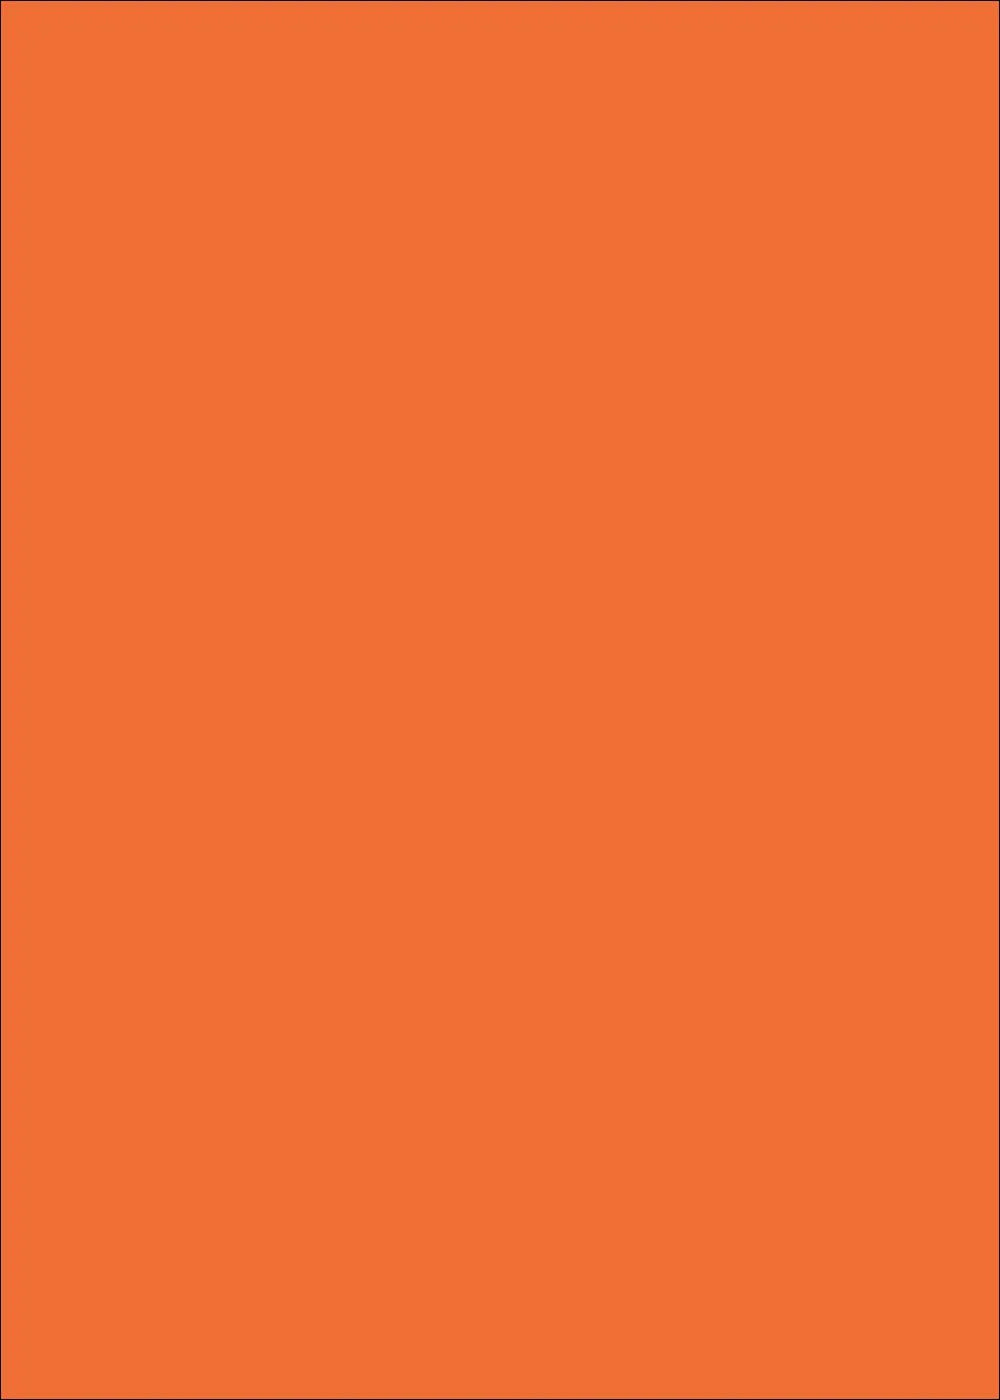 Calibre Orange Background for Mobile Banners